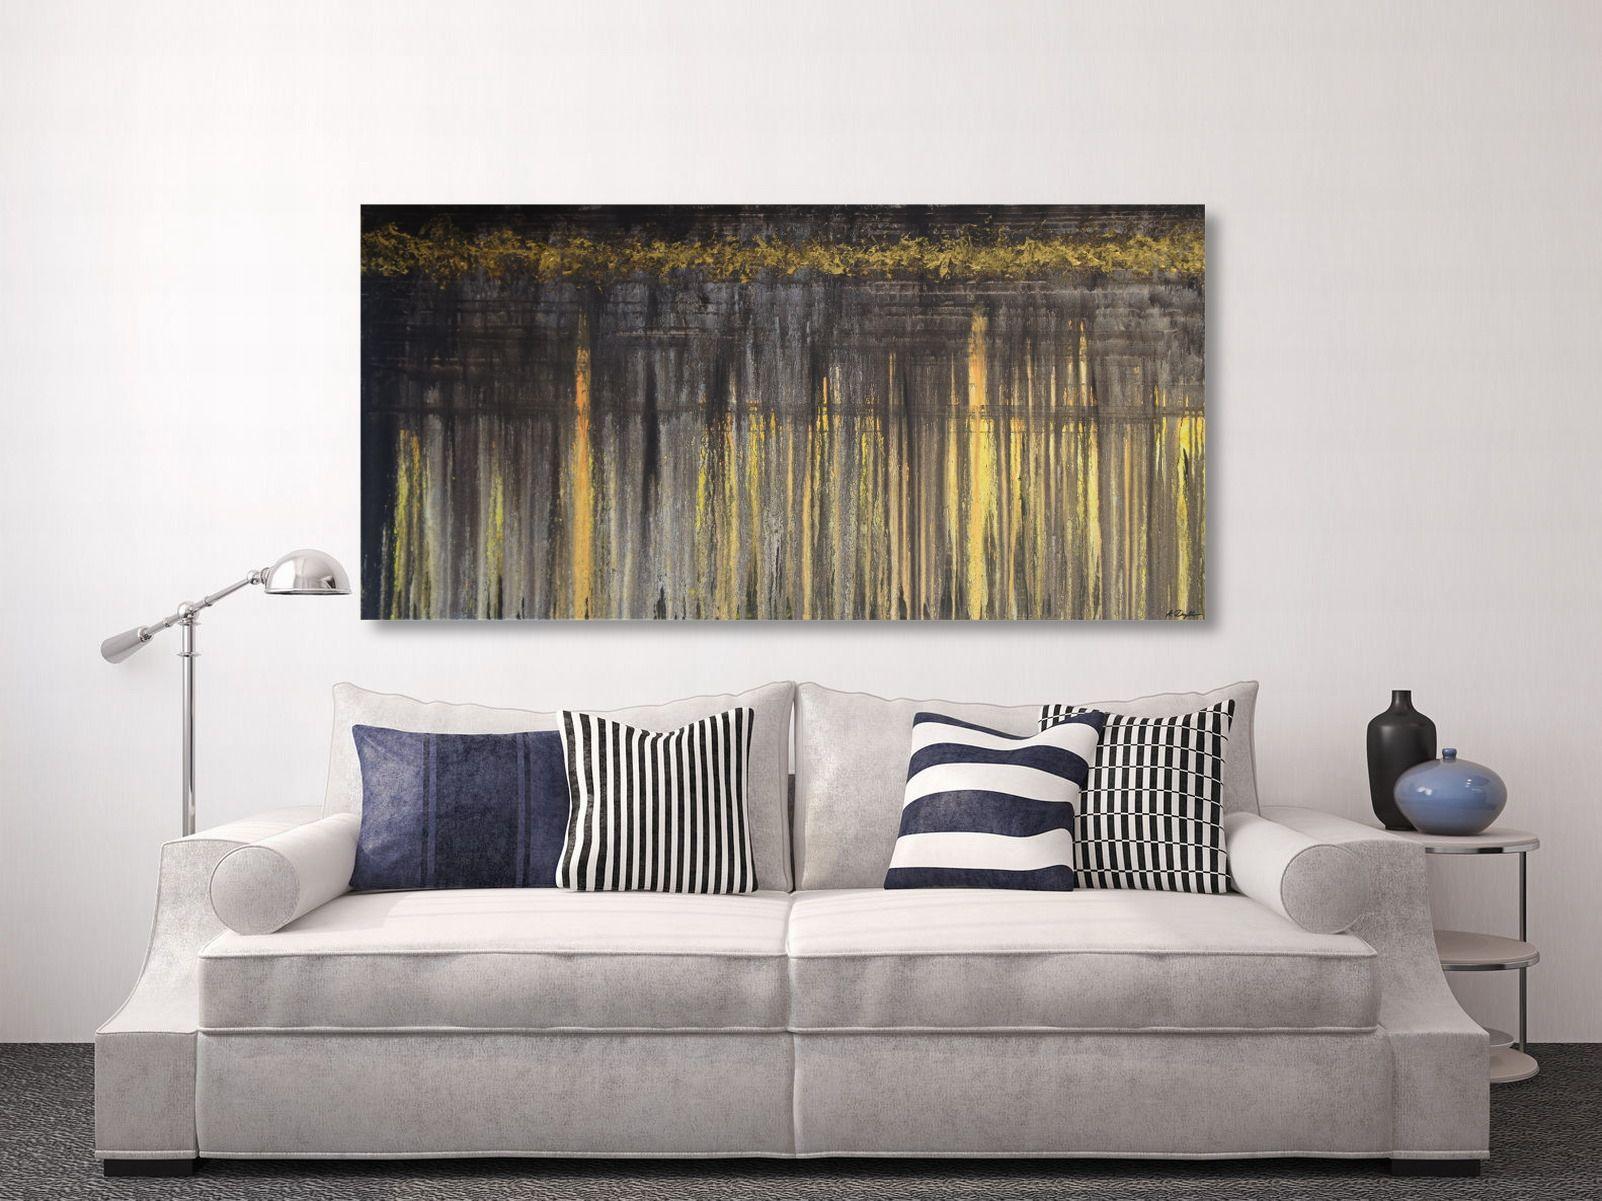 Hereâ€™s a XX-large horisonta piece that comes in colors of umbra brown, a wide variety of yellow tones, and a band of golden nuggets at the top. A very rich and warming piece for your homeâ€¦.Enjoy!    Unique painting using high-quality acrylic